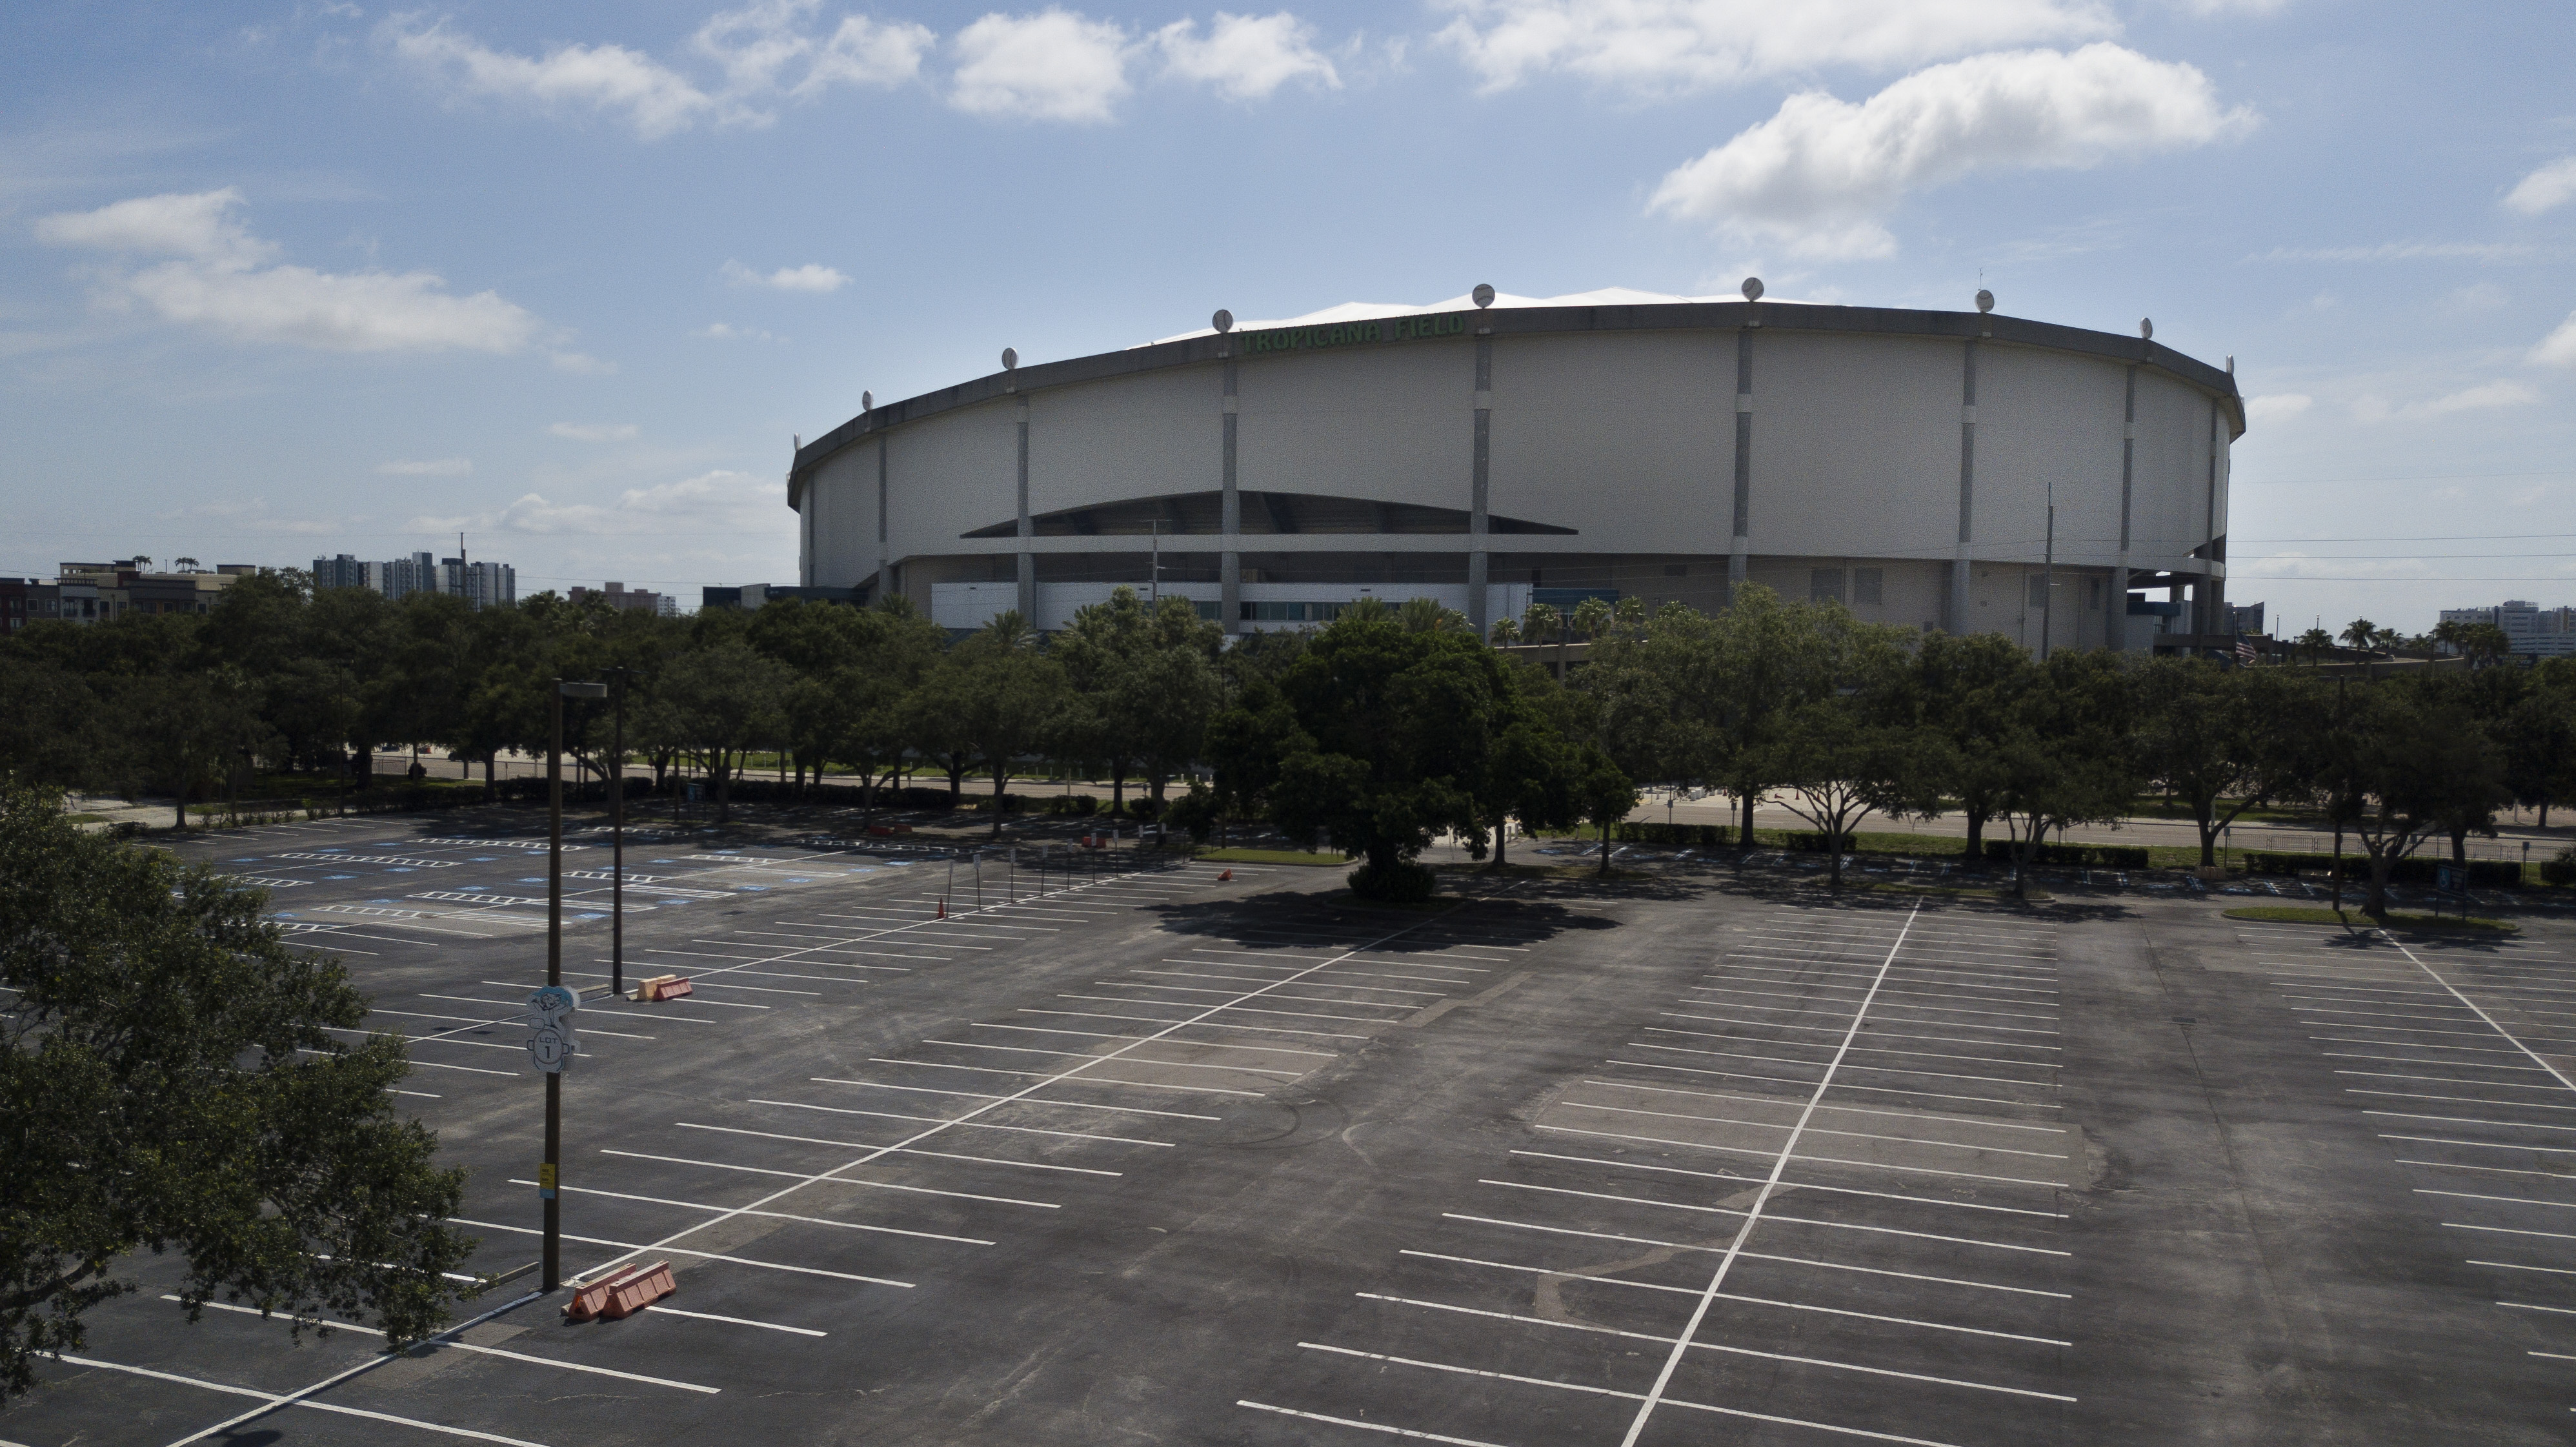 Archaeologists explain findings of possible graves at Tropicana Field